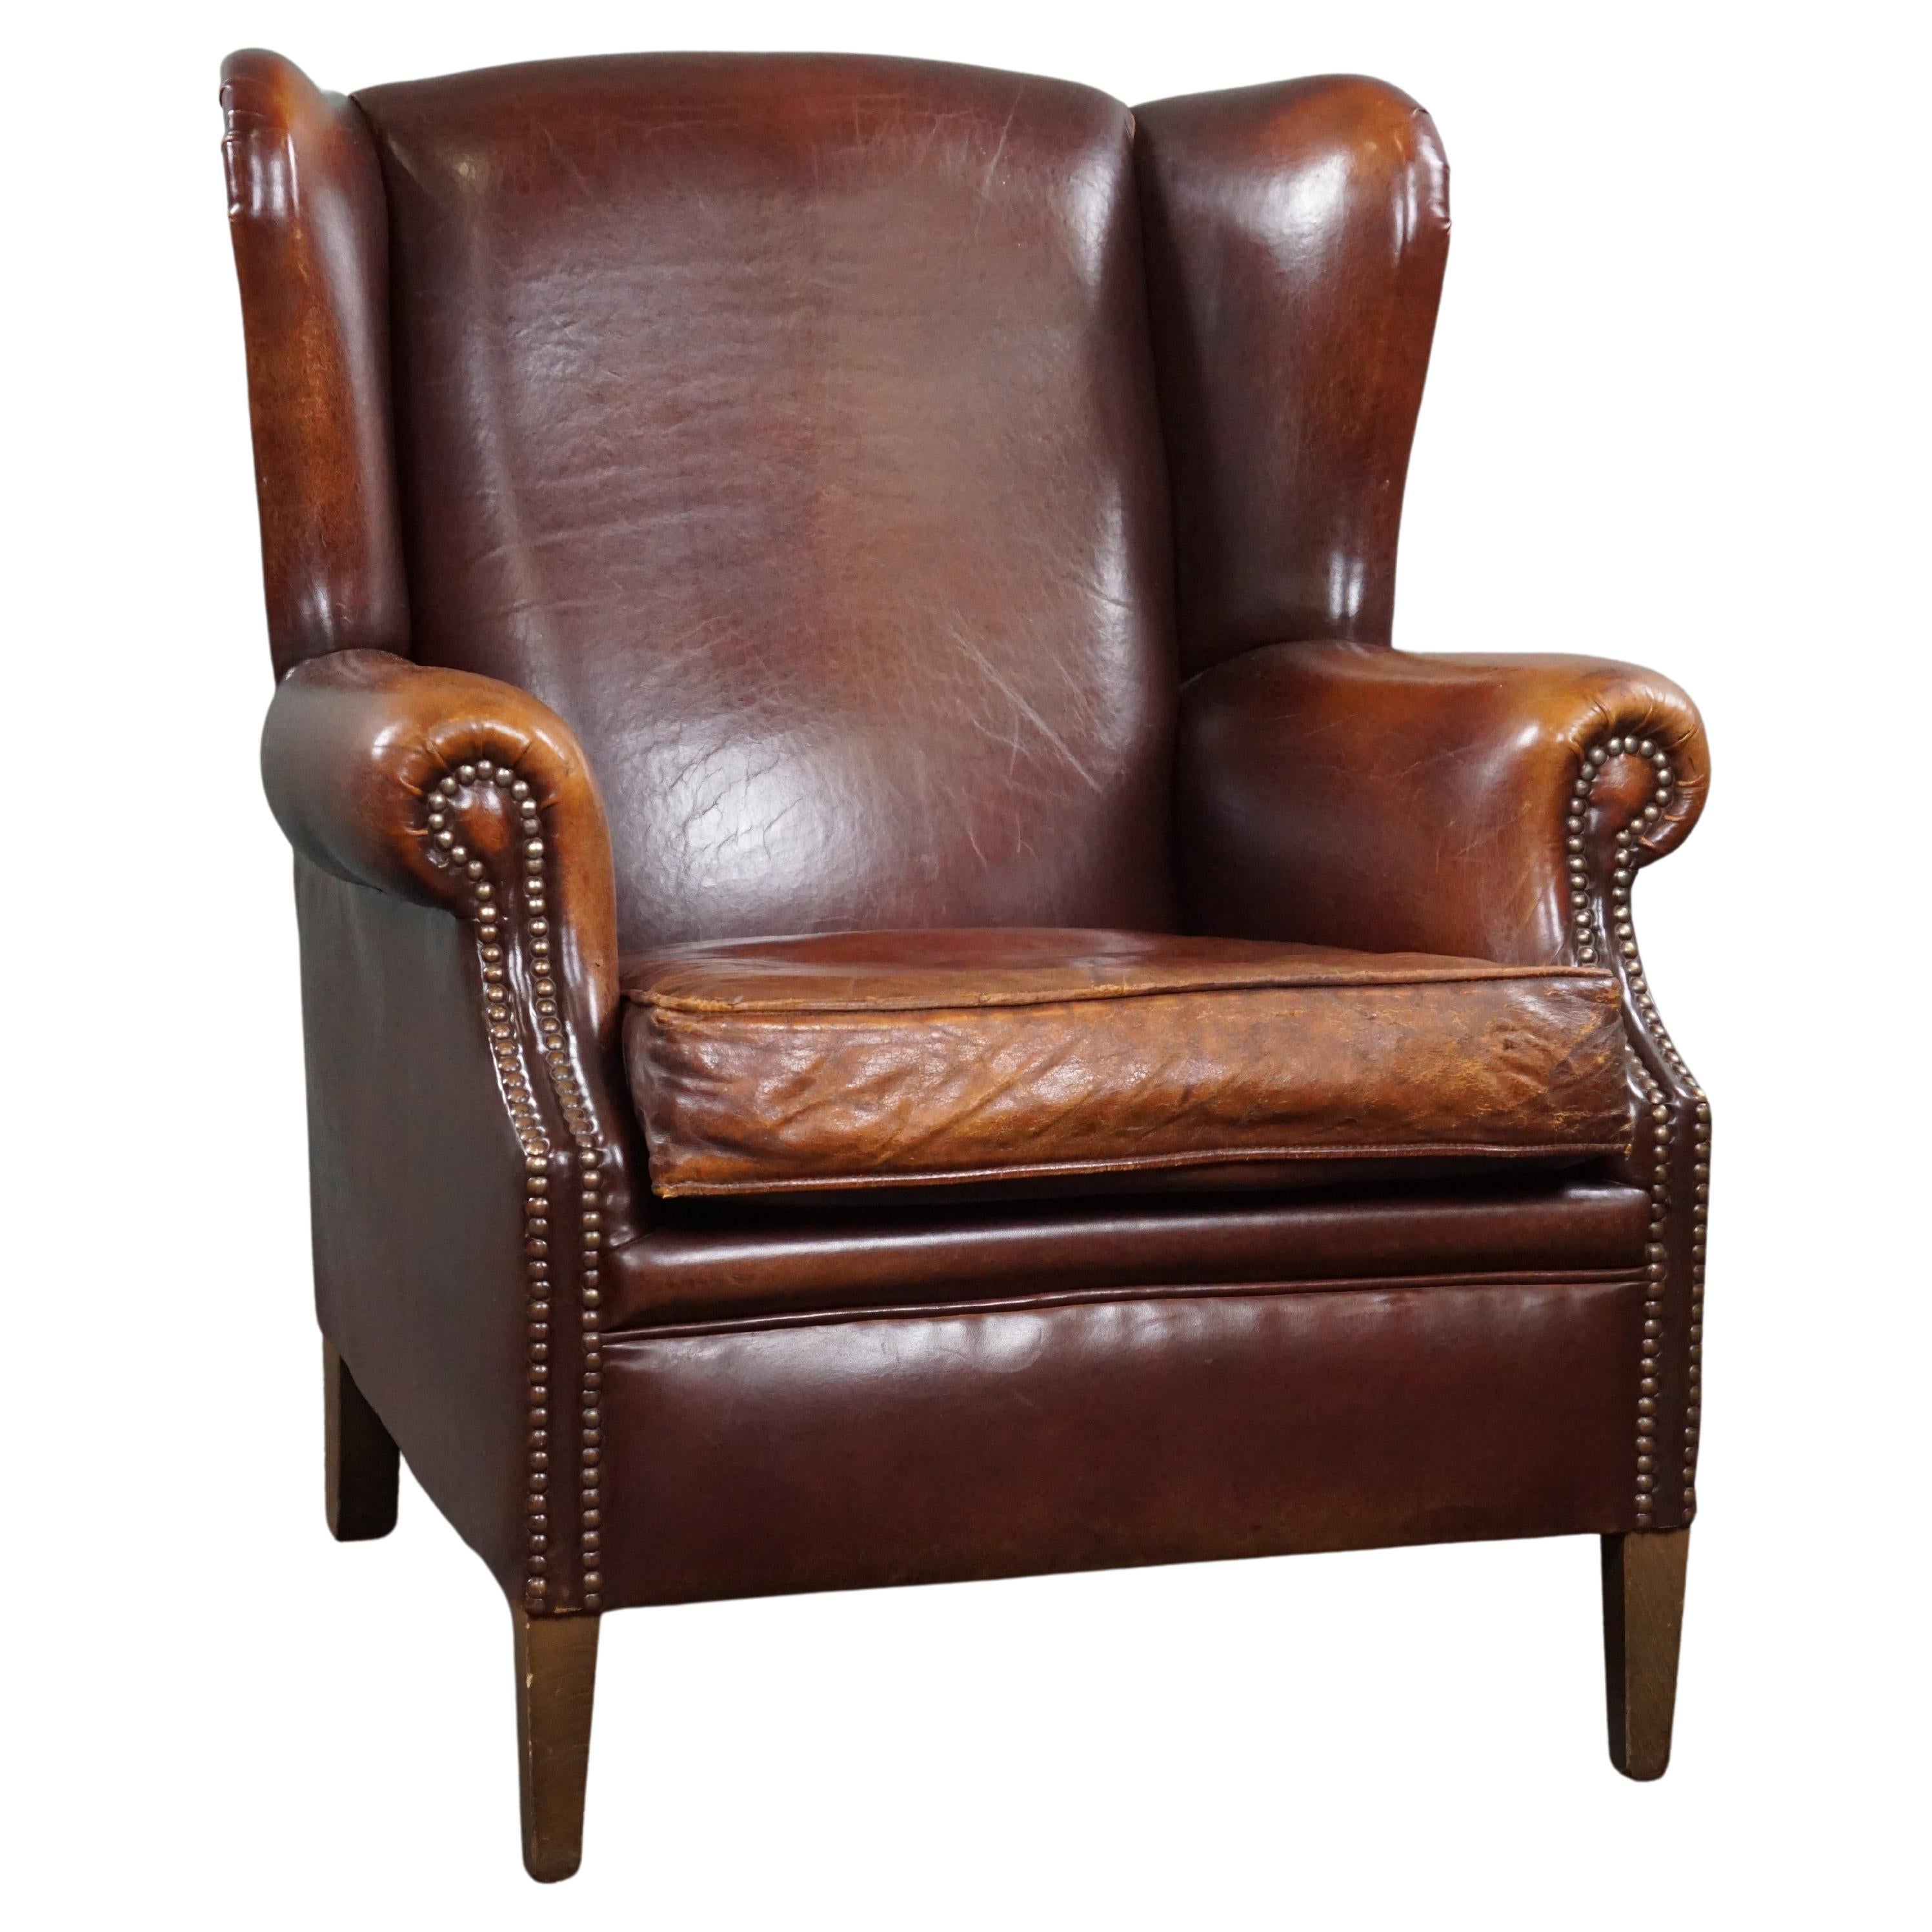 Very warm colored sheep leather wing chair  For Sale